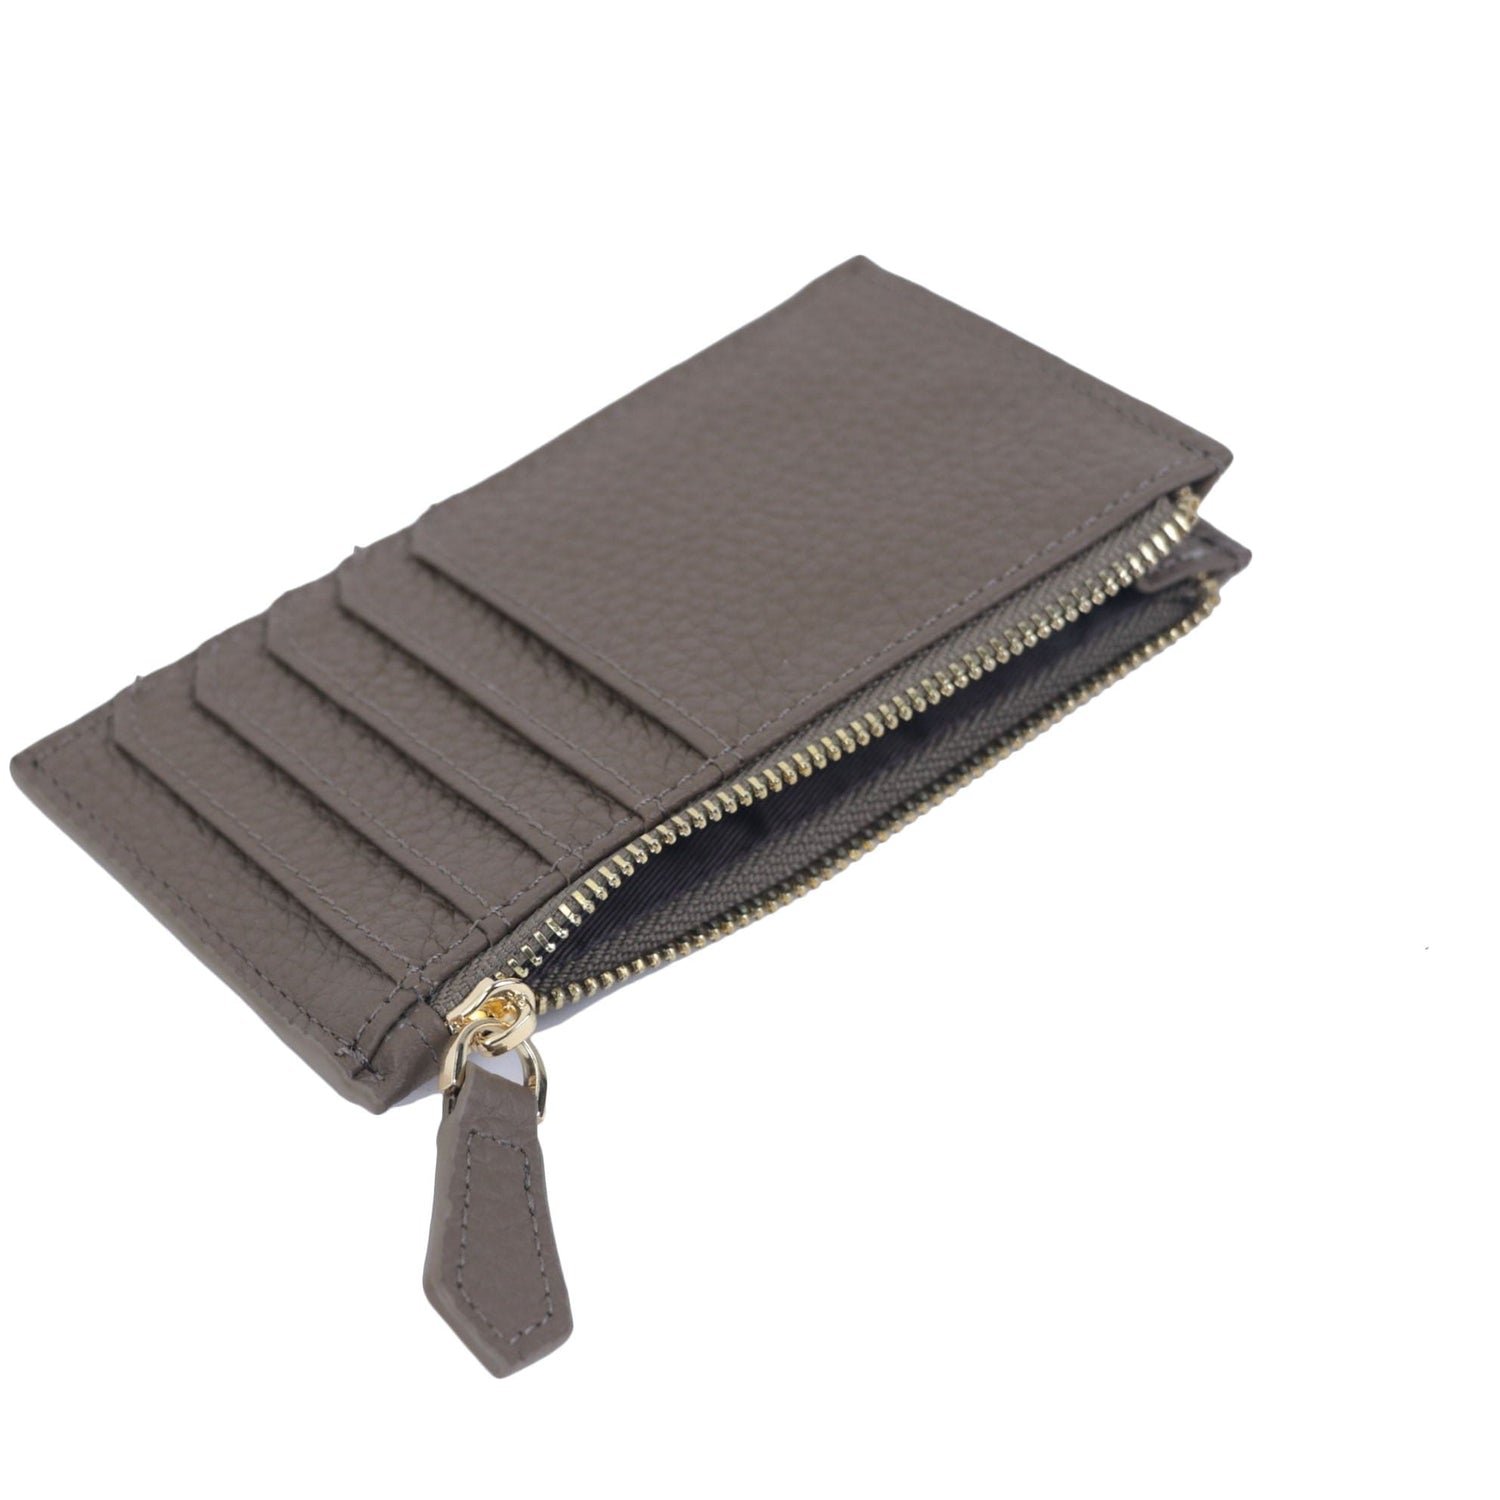 Women's Small Leather Goods & Luxury Wallets